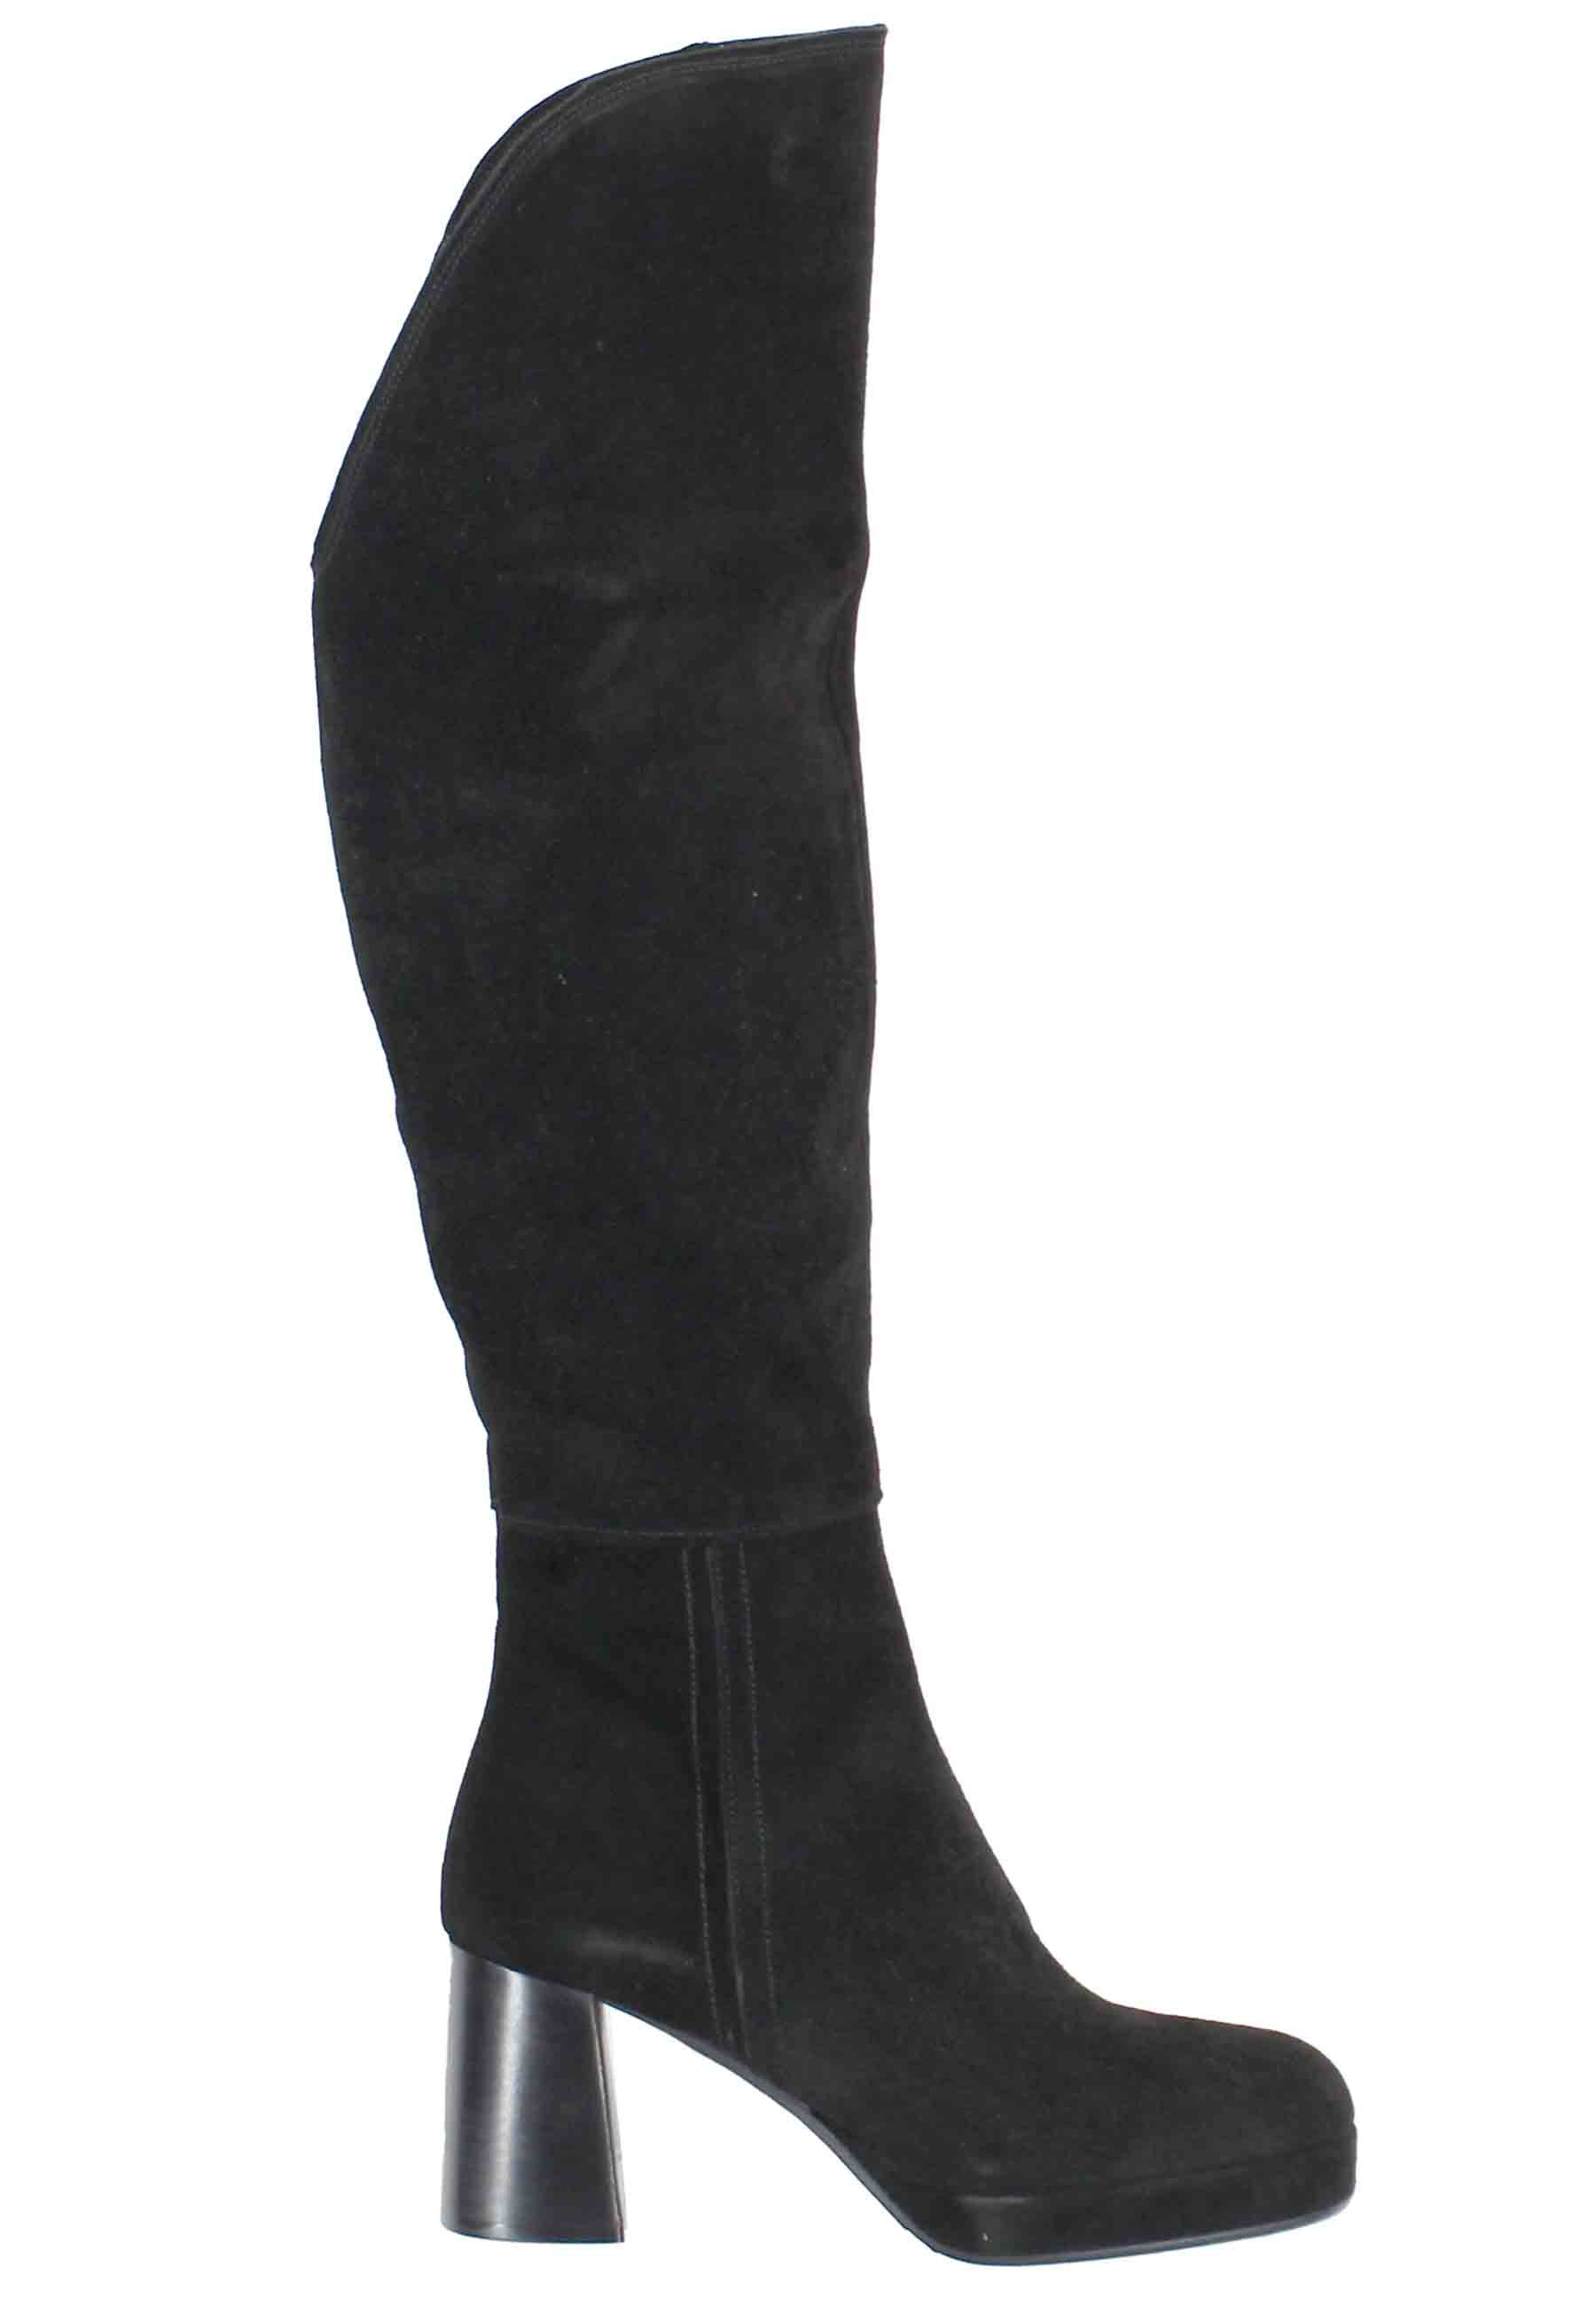 Women's black suede boots with gaiter and high heel